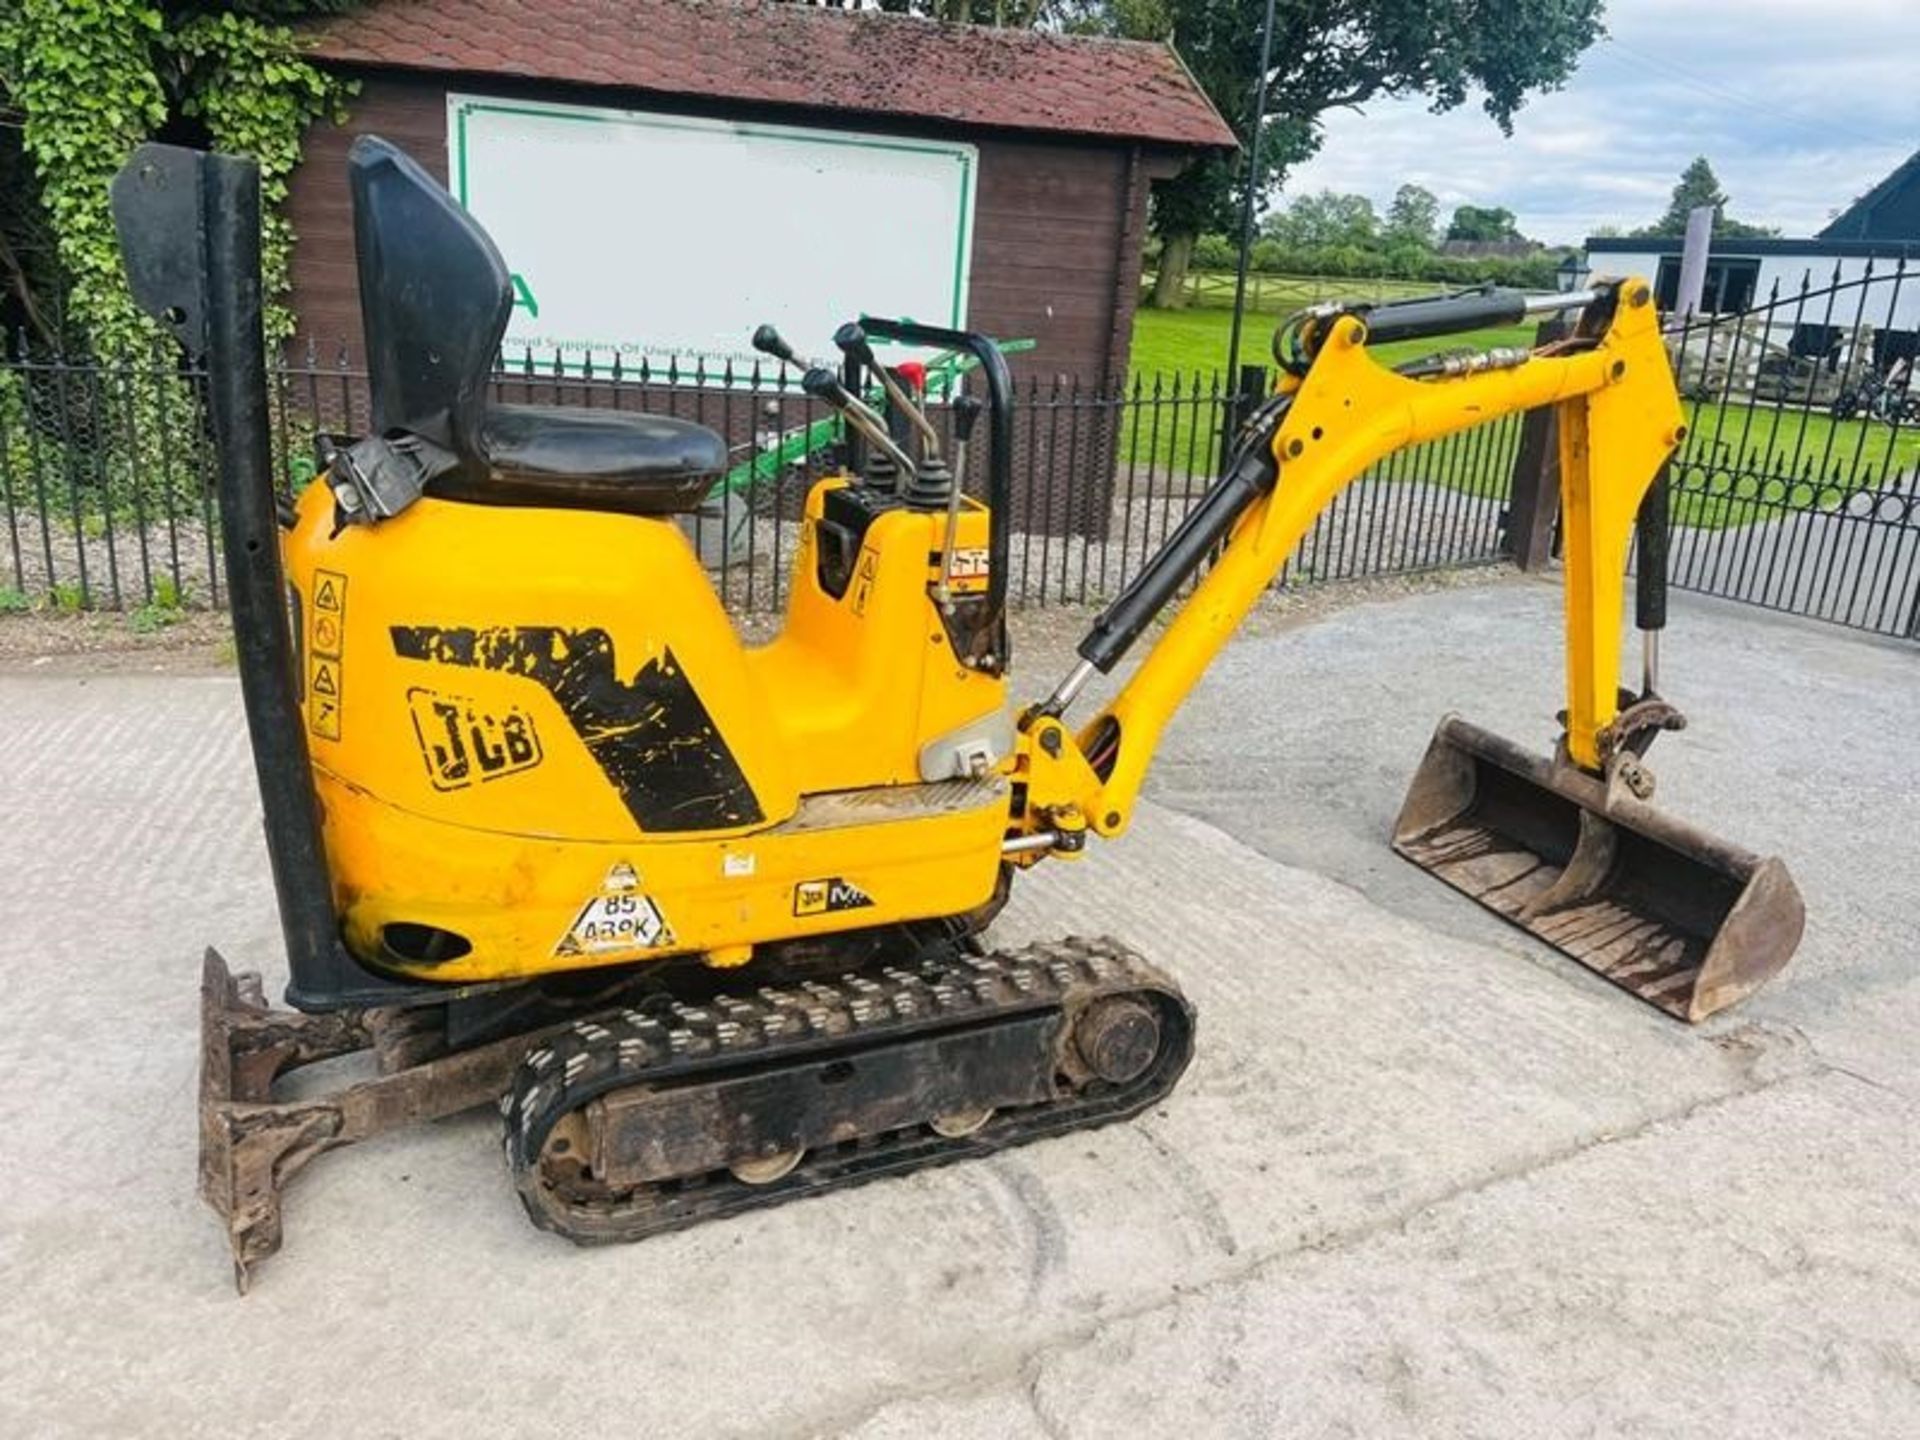 JCB MICRO DIGGER *2753 HOURS* C/W EXPANDING & RUBBER TRACKS - Image 4 of 7